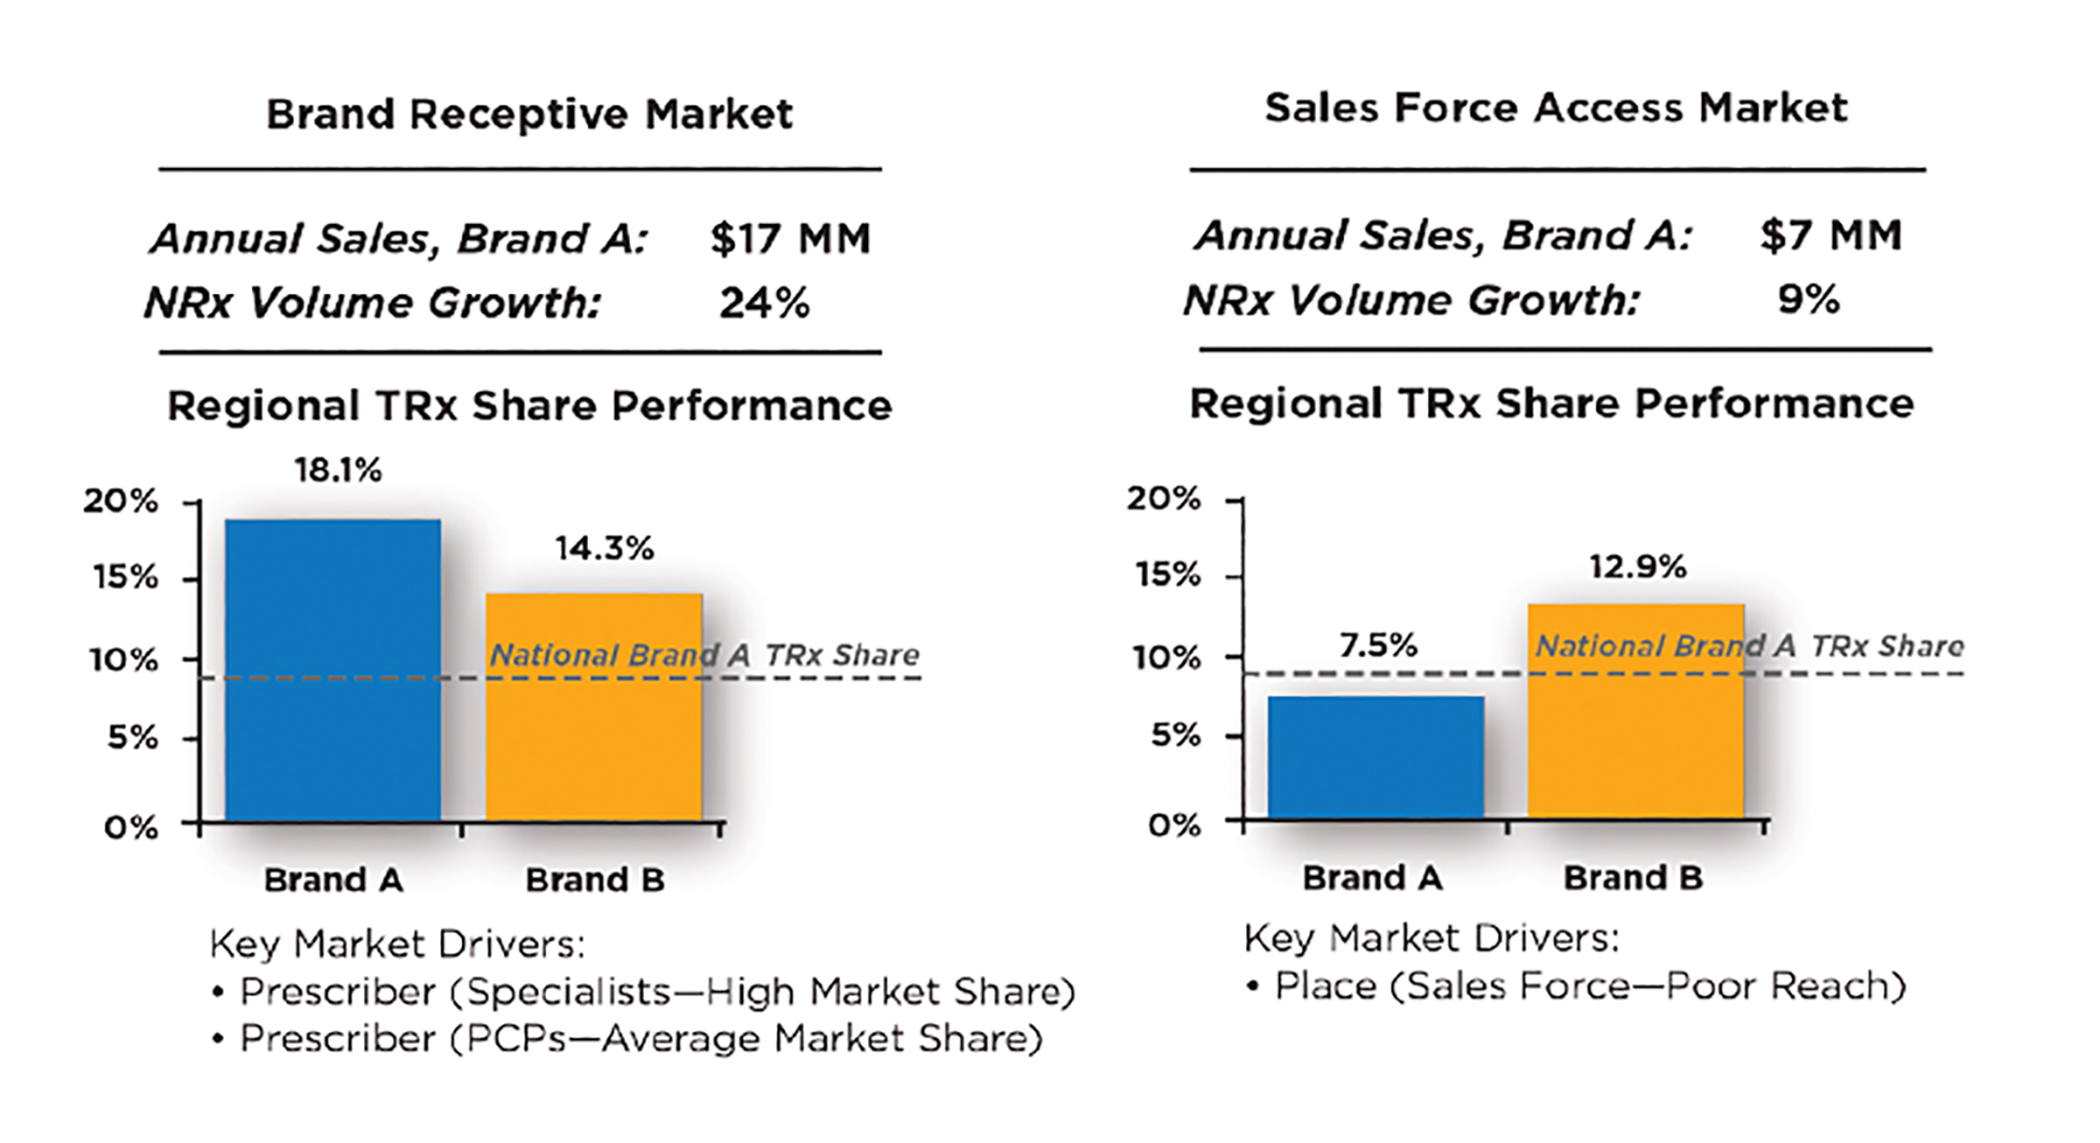 Two separate bar graphs. One shows a Brand Receptive Market where annual sales for Brand A is $17 million and NRx volume growth is 24%. The Regional TRx share performance for Brand A is 18.% and for Brand B is 14.3%. The key market drivers are prescribers, both specialists with high-market share and PCPs with average market share. The other bar graph shows a Sales Force Access Market where annual sales for brand A is $7 million and the NRx volume growth is 9%. The Regional TRx share performance for Brand A is 7.5% and for Brand B it is 12.9%. The ket market driver here is place in which the sales force has a poor reach. 